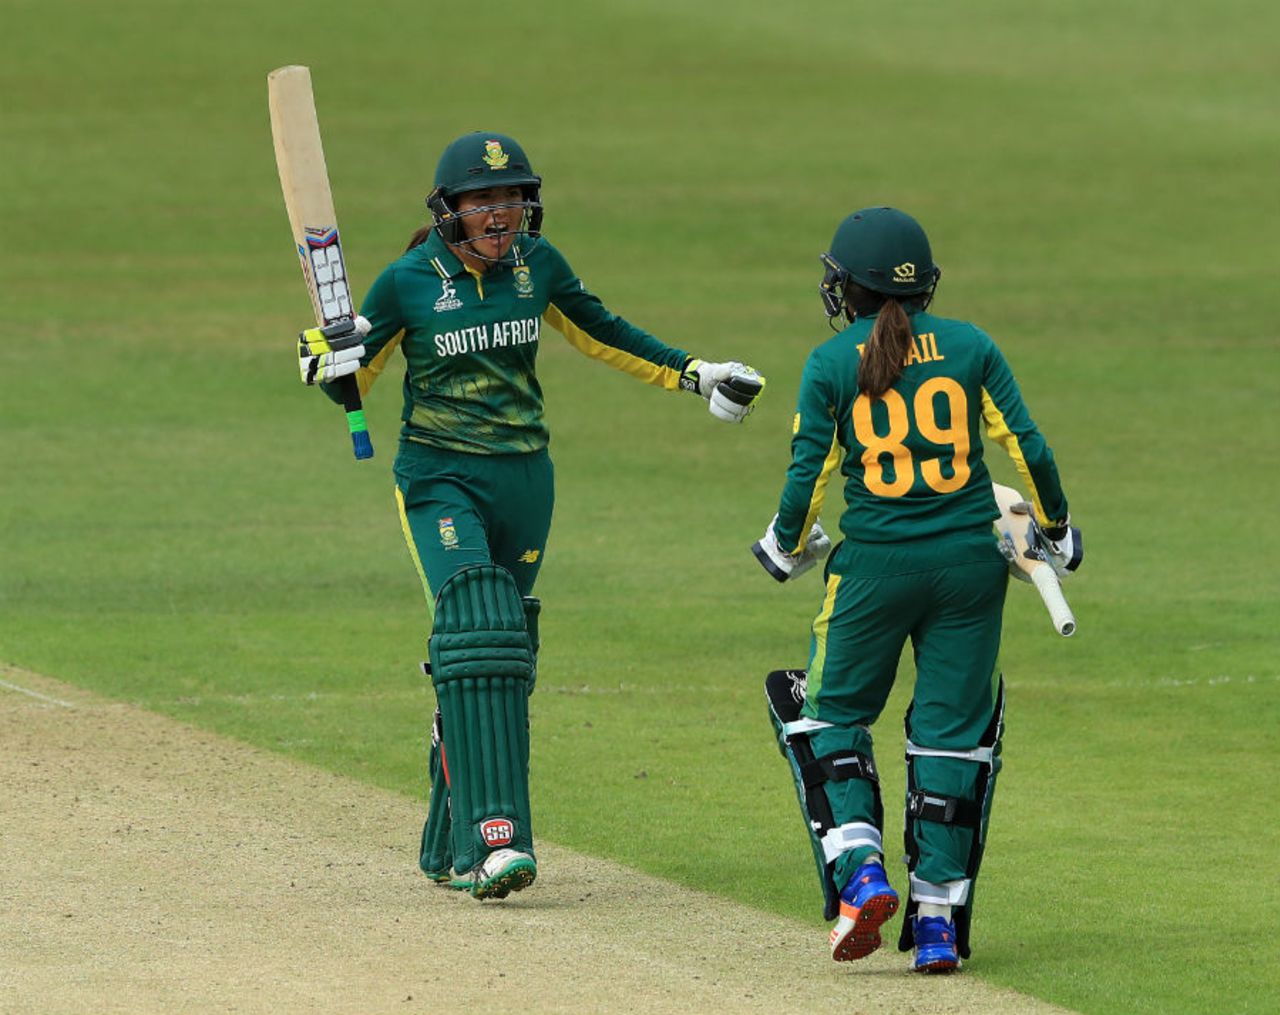 Sune Luus and Shabnim Ismail allayed fears of a heart-wrenching loss, South Africa v Pakistan, Women's World Cup, June 25, 2017